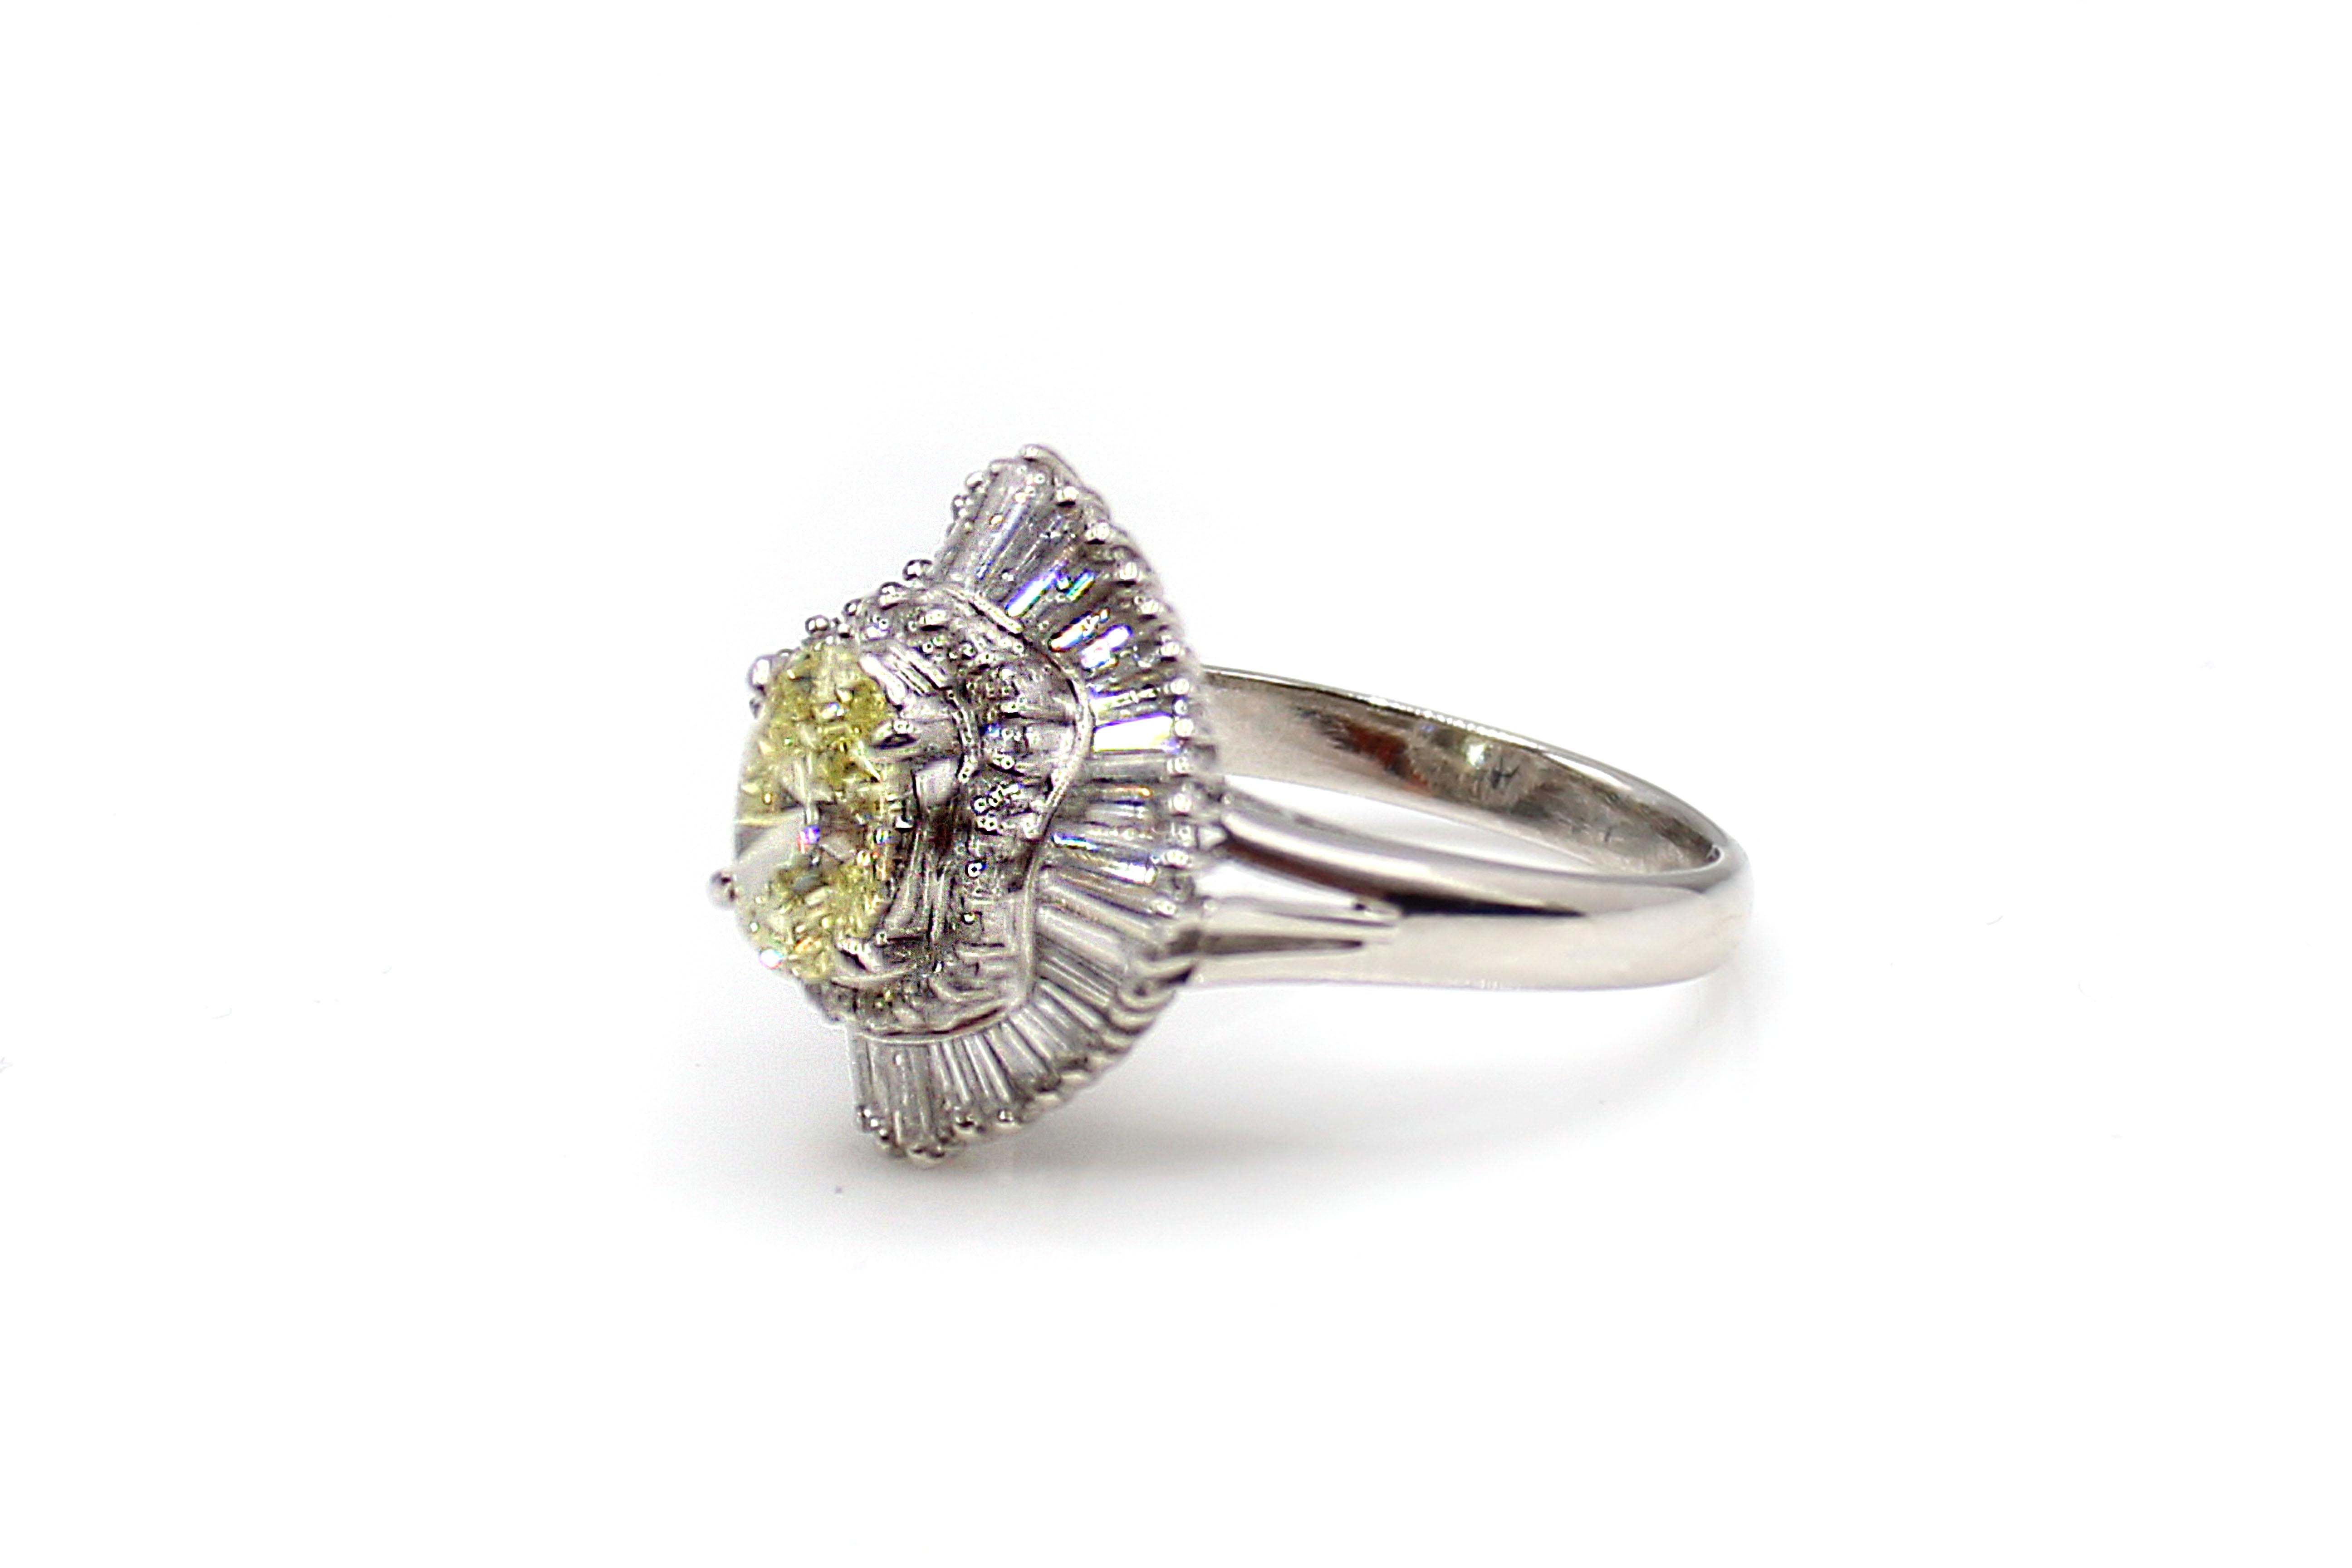 Wonderfully hand-crafted, this 1970s ballerina ring features a beautiful lemon colored natural fancy yellow oval diamond weighing 1.12 carats. The diamond is accompanied by a report from the GIA. Surrounding the center diamond are 20 round brilliant